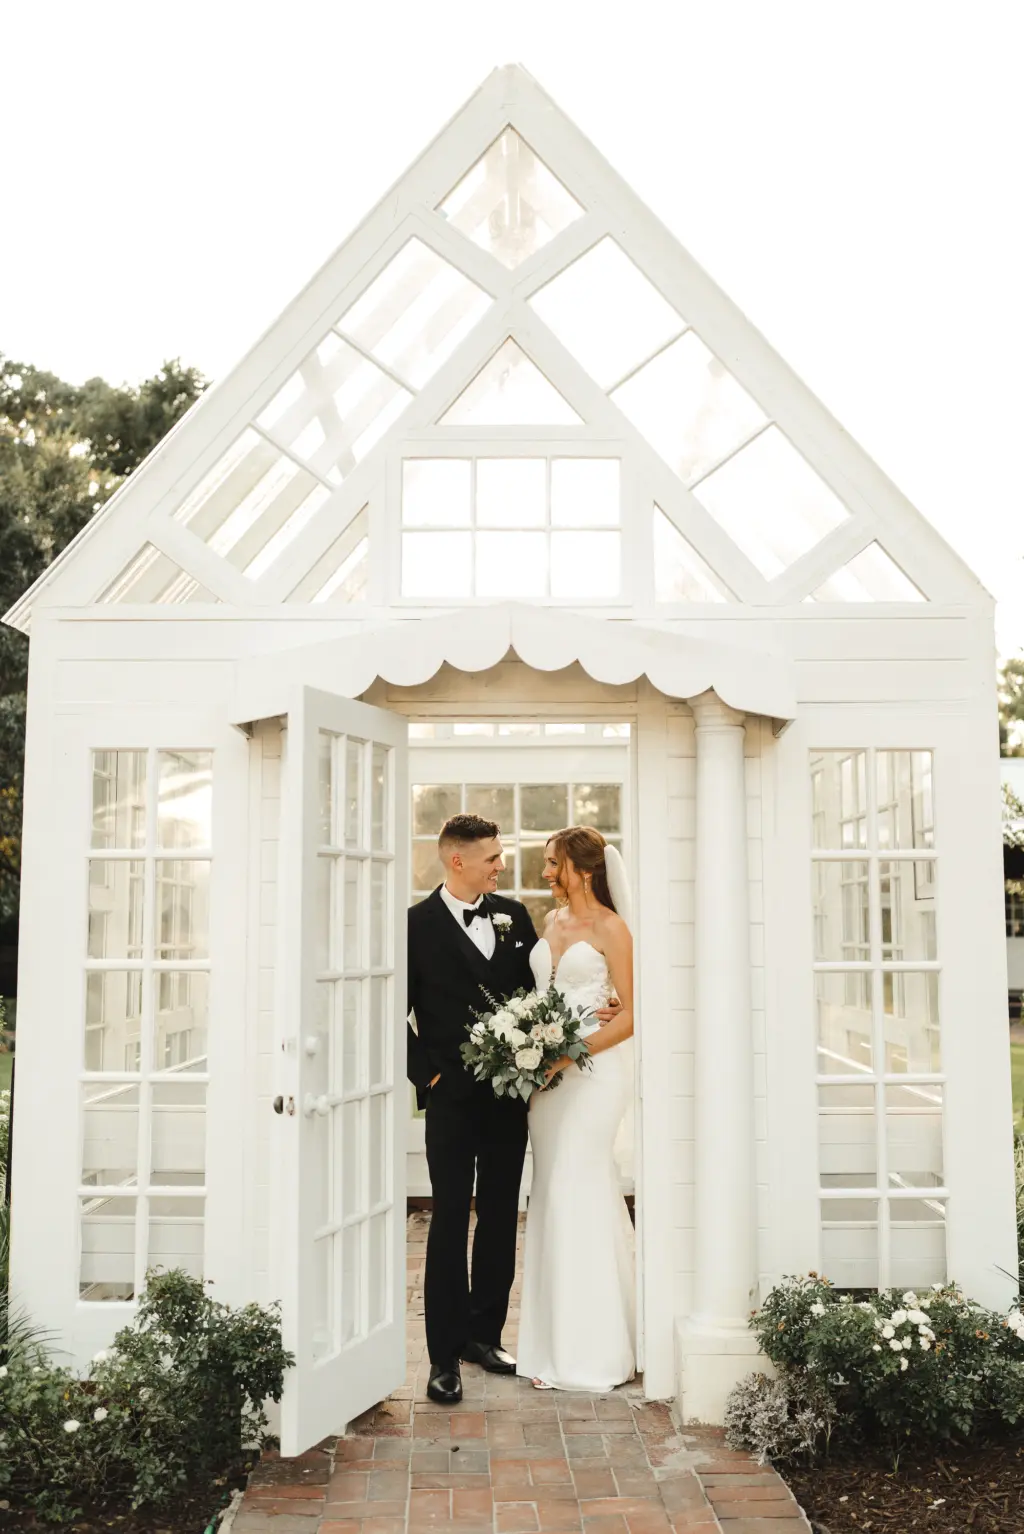 Bride and Groom Greenhouse Wedding Portrait | Tampa Bay Nature-Inspired Venue Cross Creek Ranch